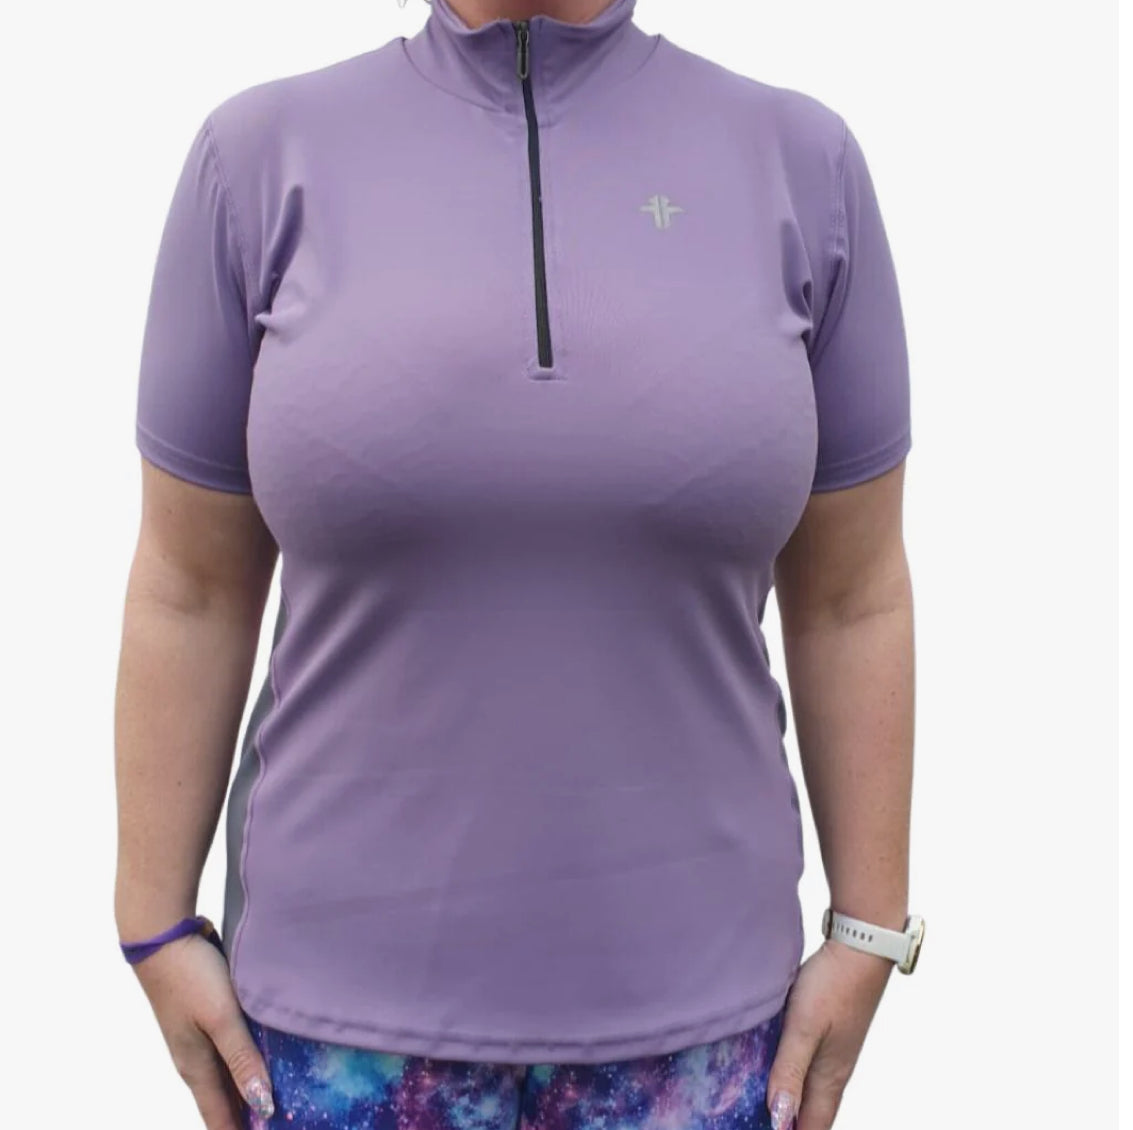 Funky Fit Performance Baselayer - Lilac / Grey